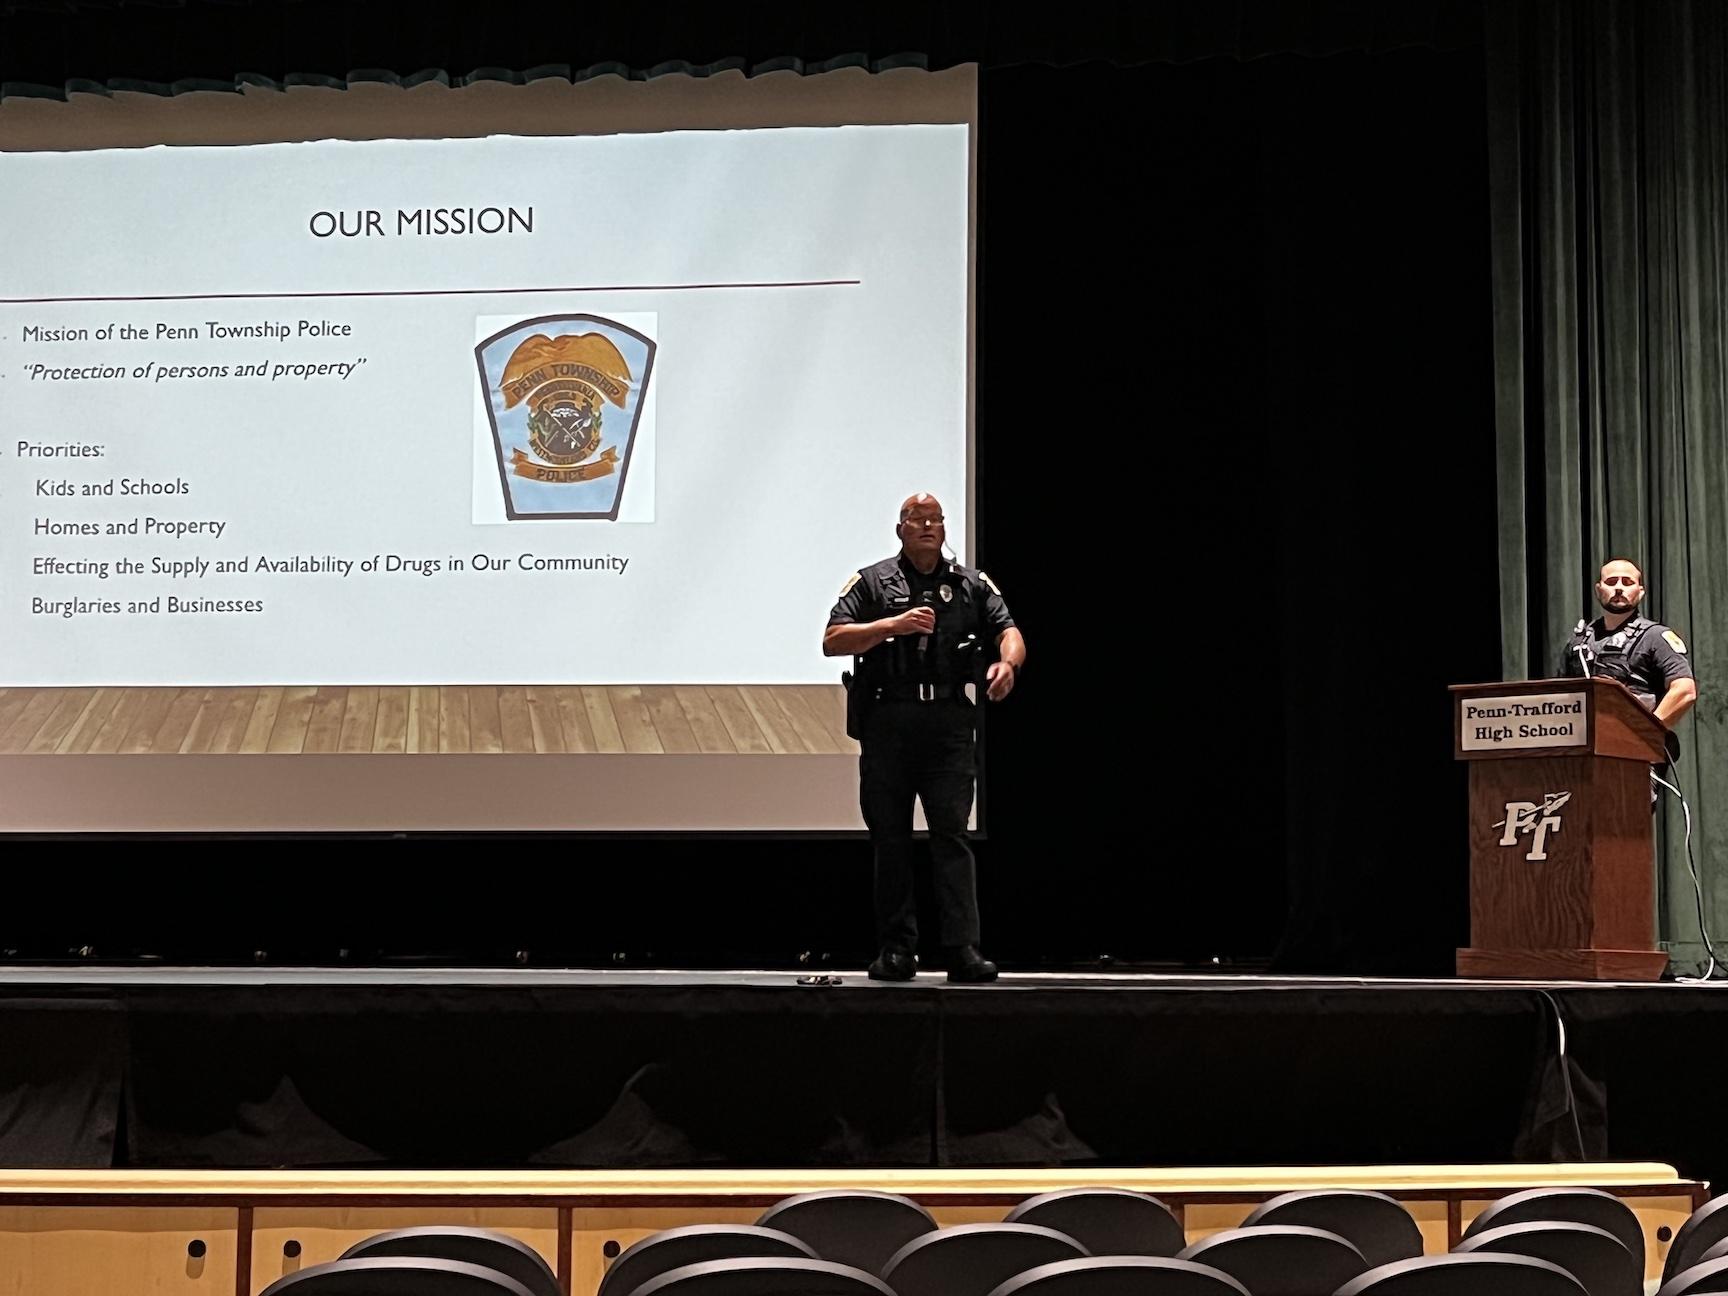 Officers Dave Meyers and James Kowalczuk of the Penn Township Police lead a Safety and Security session